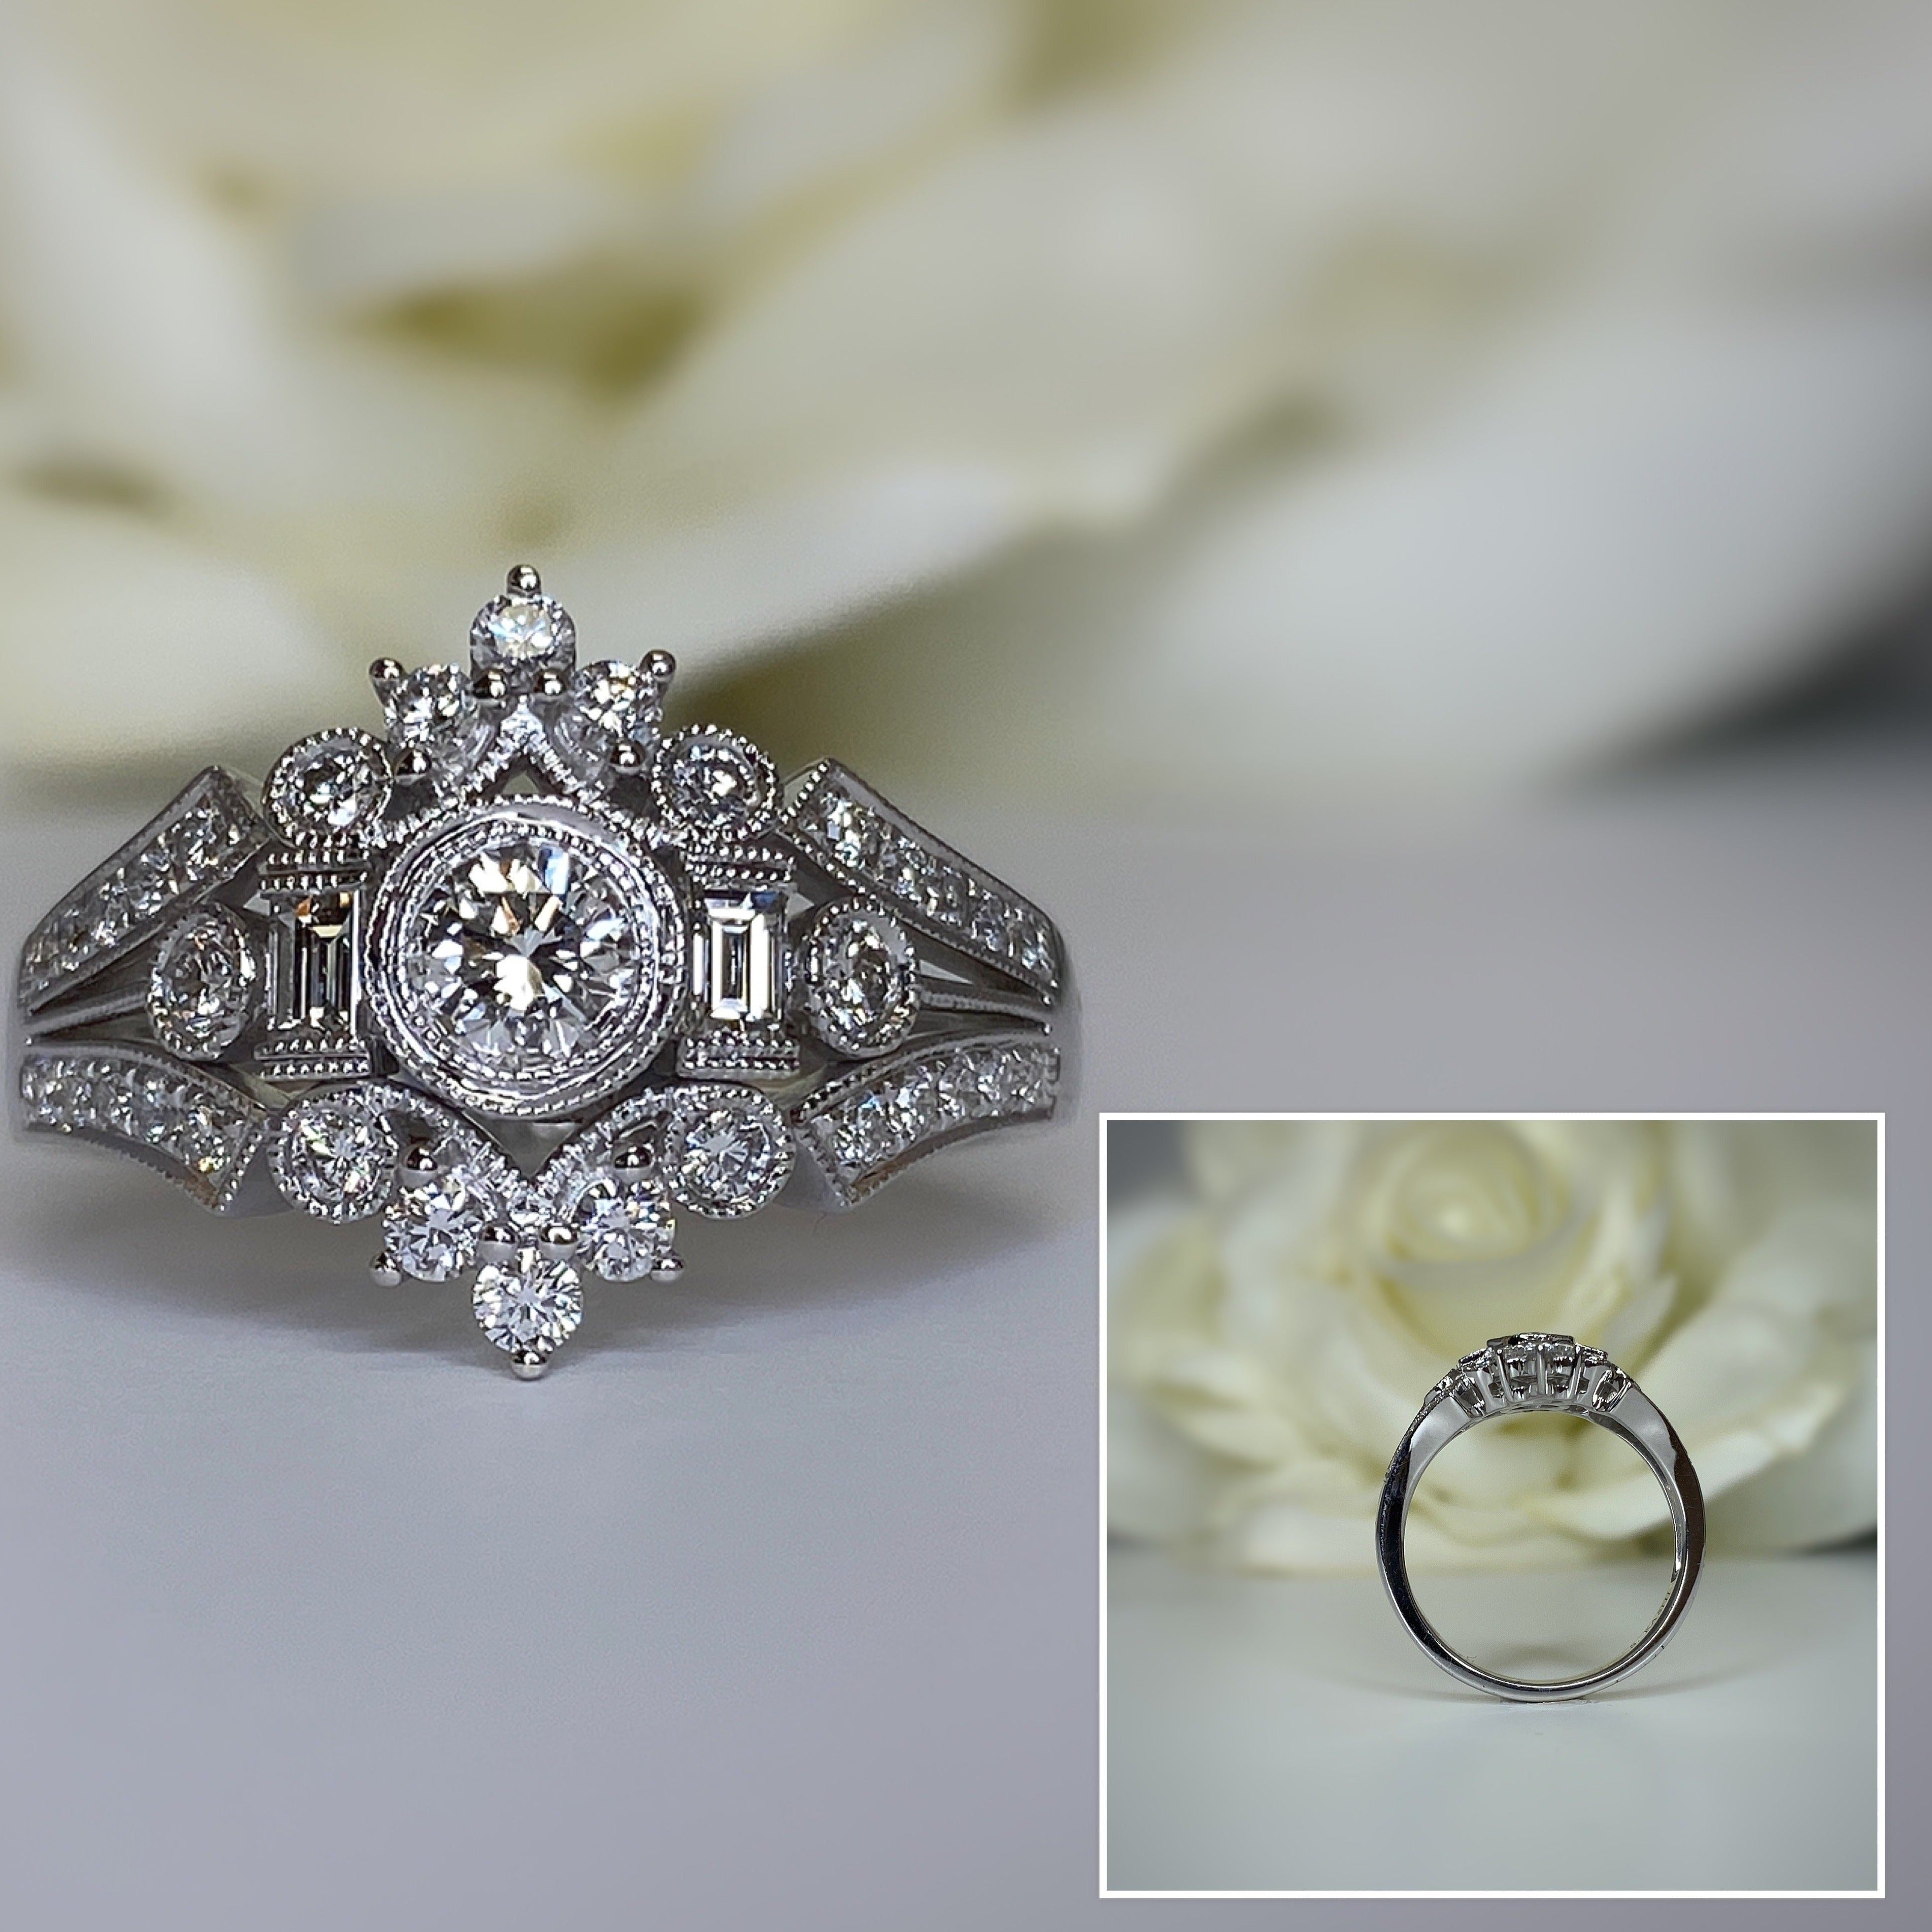 White Gold Vintage inspired round and baguette Diamond Engagement ring